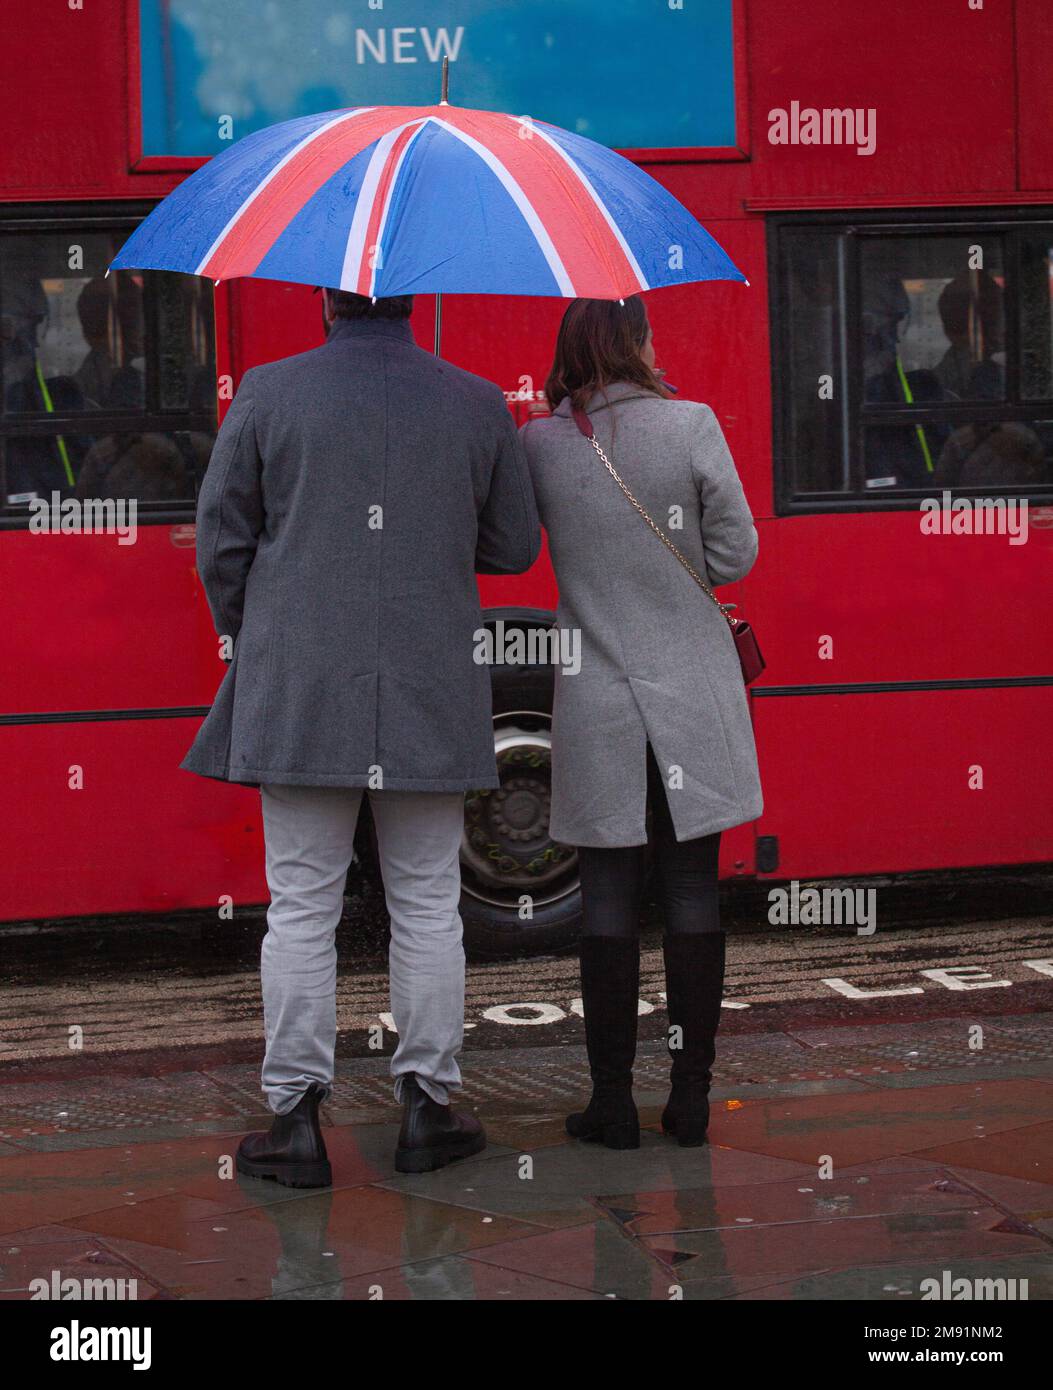 Back view of well-dressed young couple with British flag umbrella wainting in front af a red London double-decker bus. London, England - December 31, Stock Photo